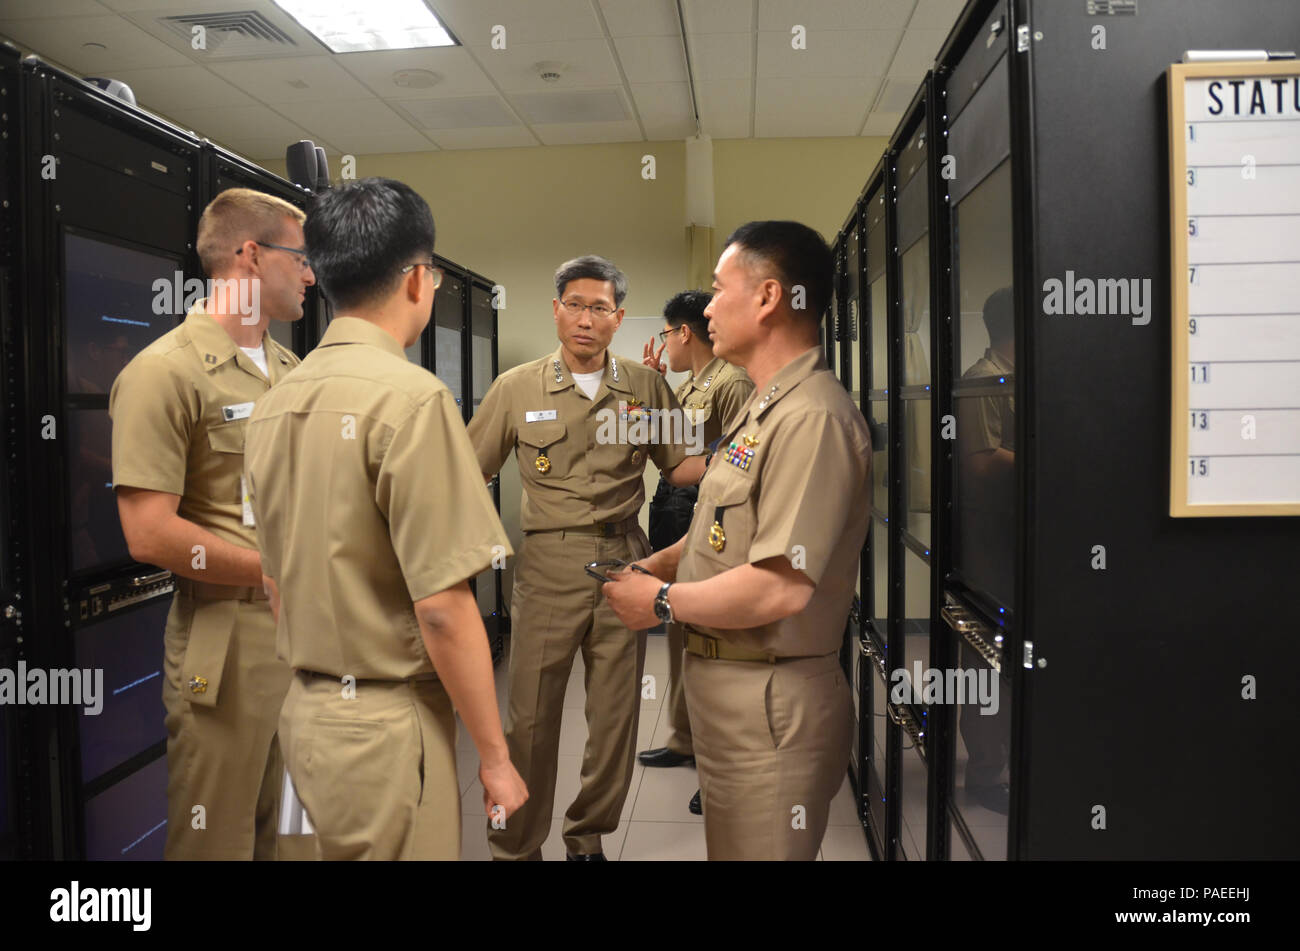 160331-N-YM720-140 SANTA RITA, Guam (March 31, 2016) Members of the U.S. and ROKN submarine forces are shown the facilities at Naval Submarine Training Center Pacific Detachment Guam after the first day of the 43rd Submarine Warfare Committee Meeting (SWCM). SWCM is a bilateral discussion between the U.S. and ROKN submarine forces designed to foster the partnership and focuses on submarine tactics, force integraton and future submarine development. (U.S. Navy photo by MC3 Allen McNair/Released) Stock Photo